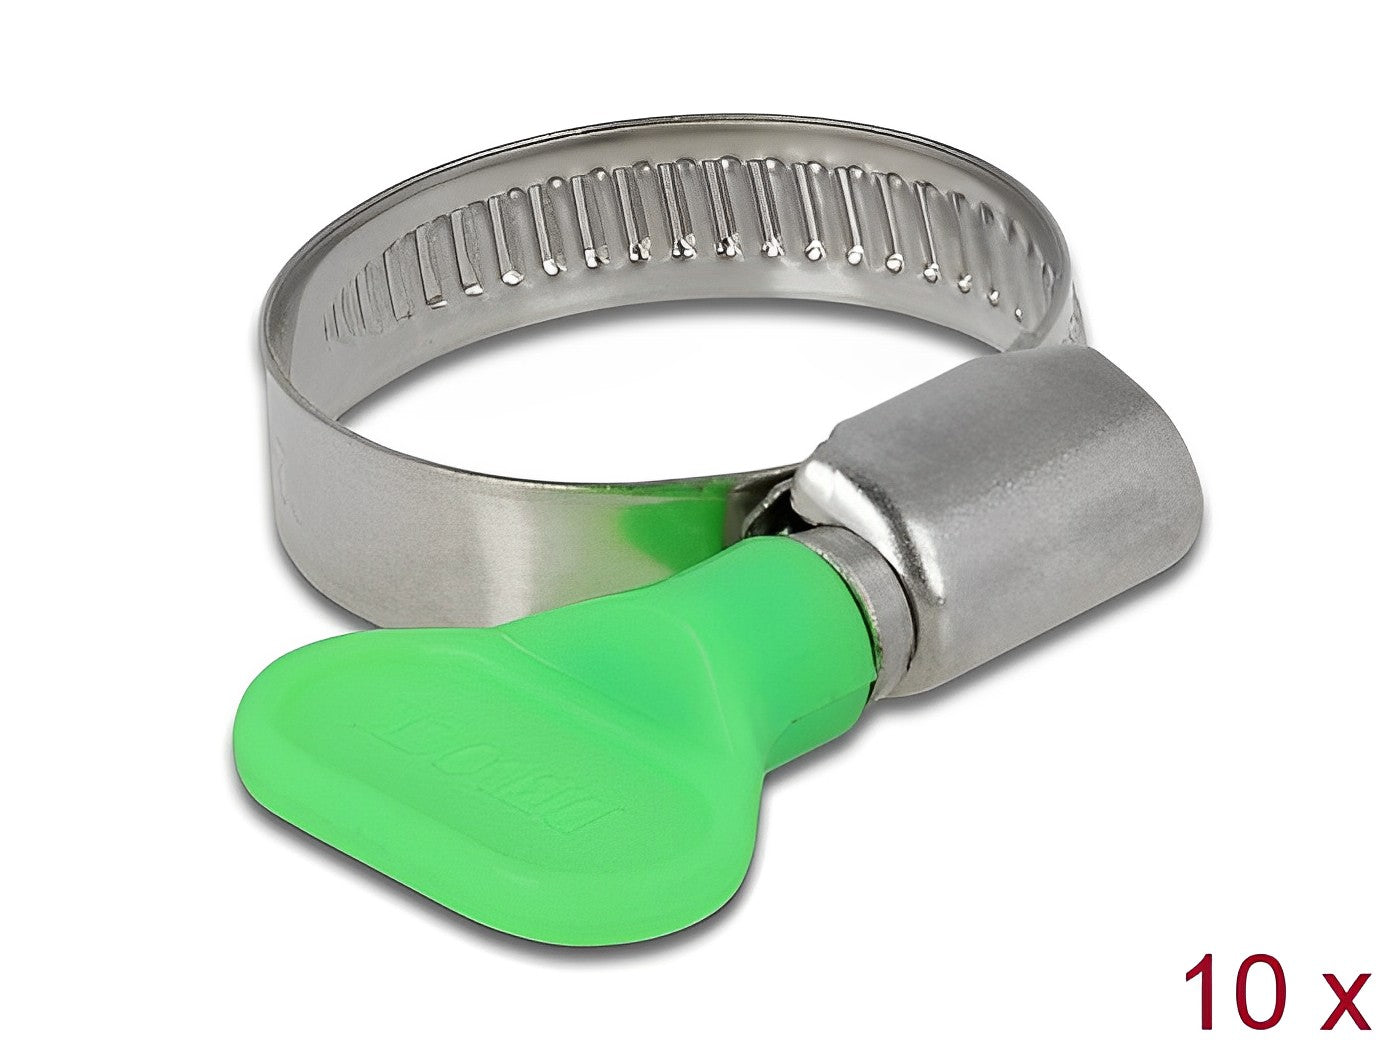 Delock Butterfly Hose Clamp 22 - 32 mm 10 pieces green - delock.israel